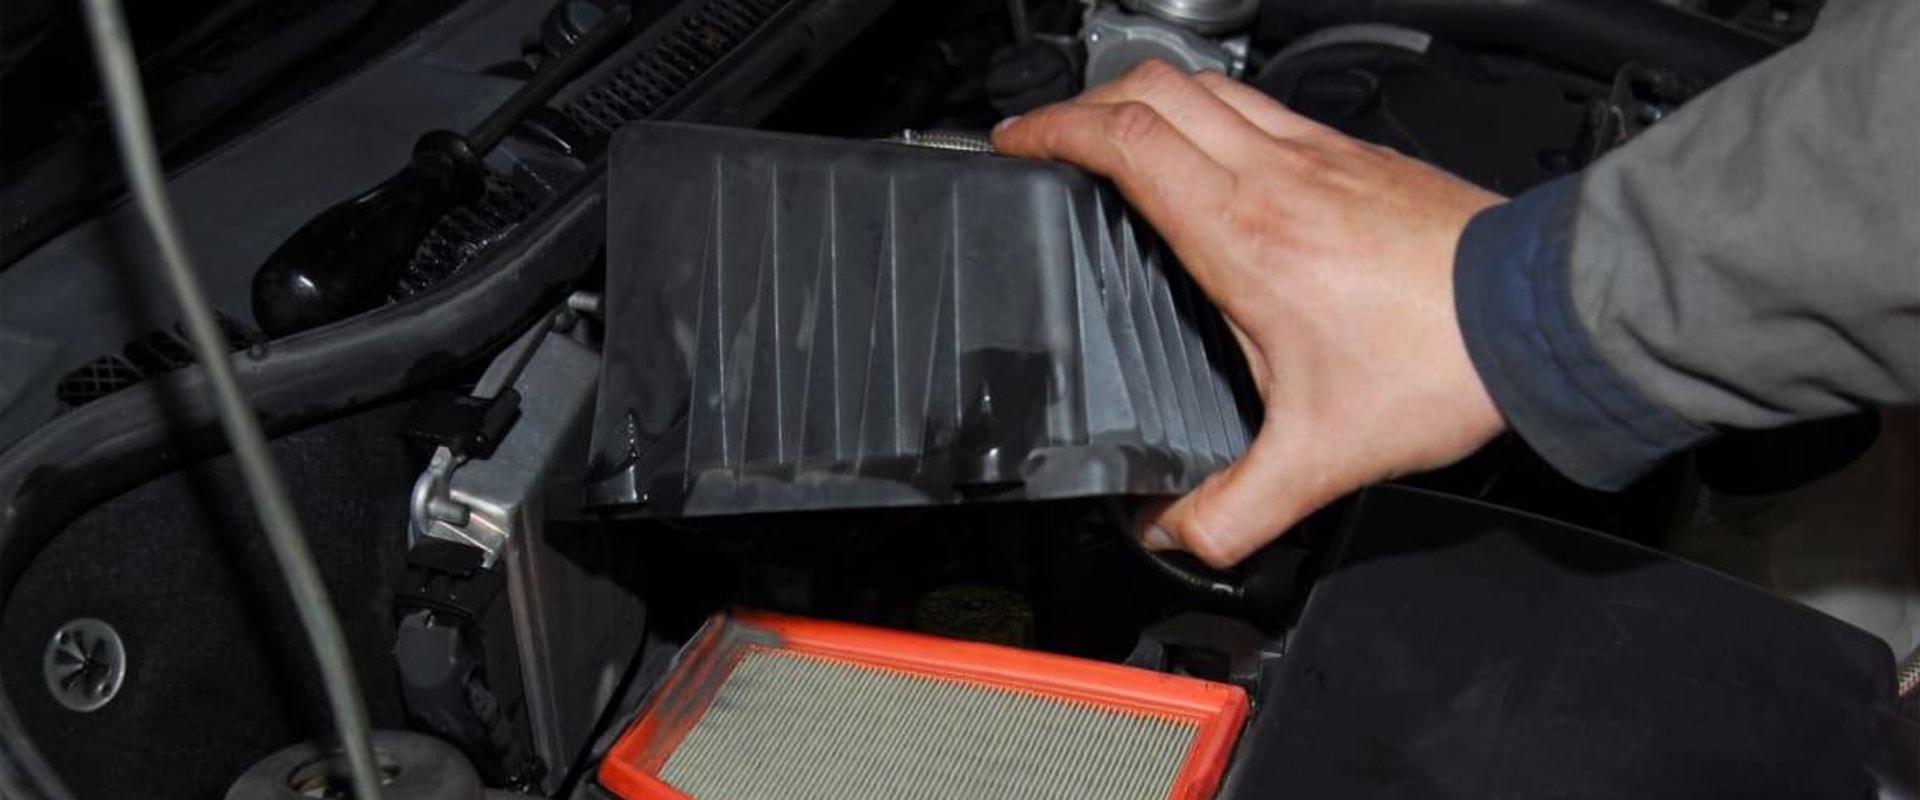 How Long Do Washable Car Air Filters Last? - An Expert's Guide